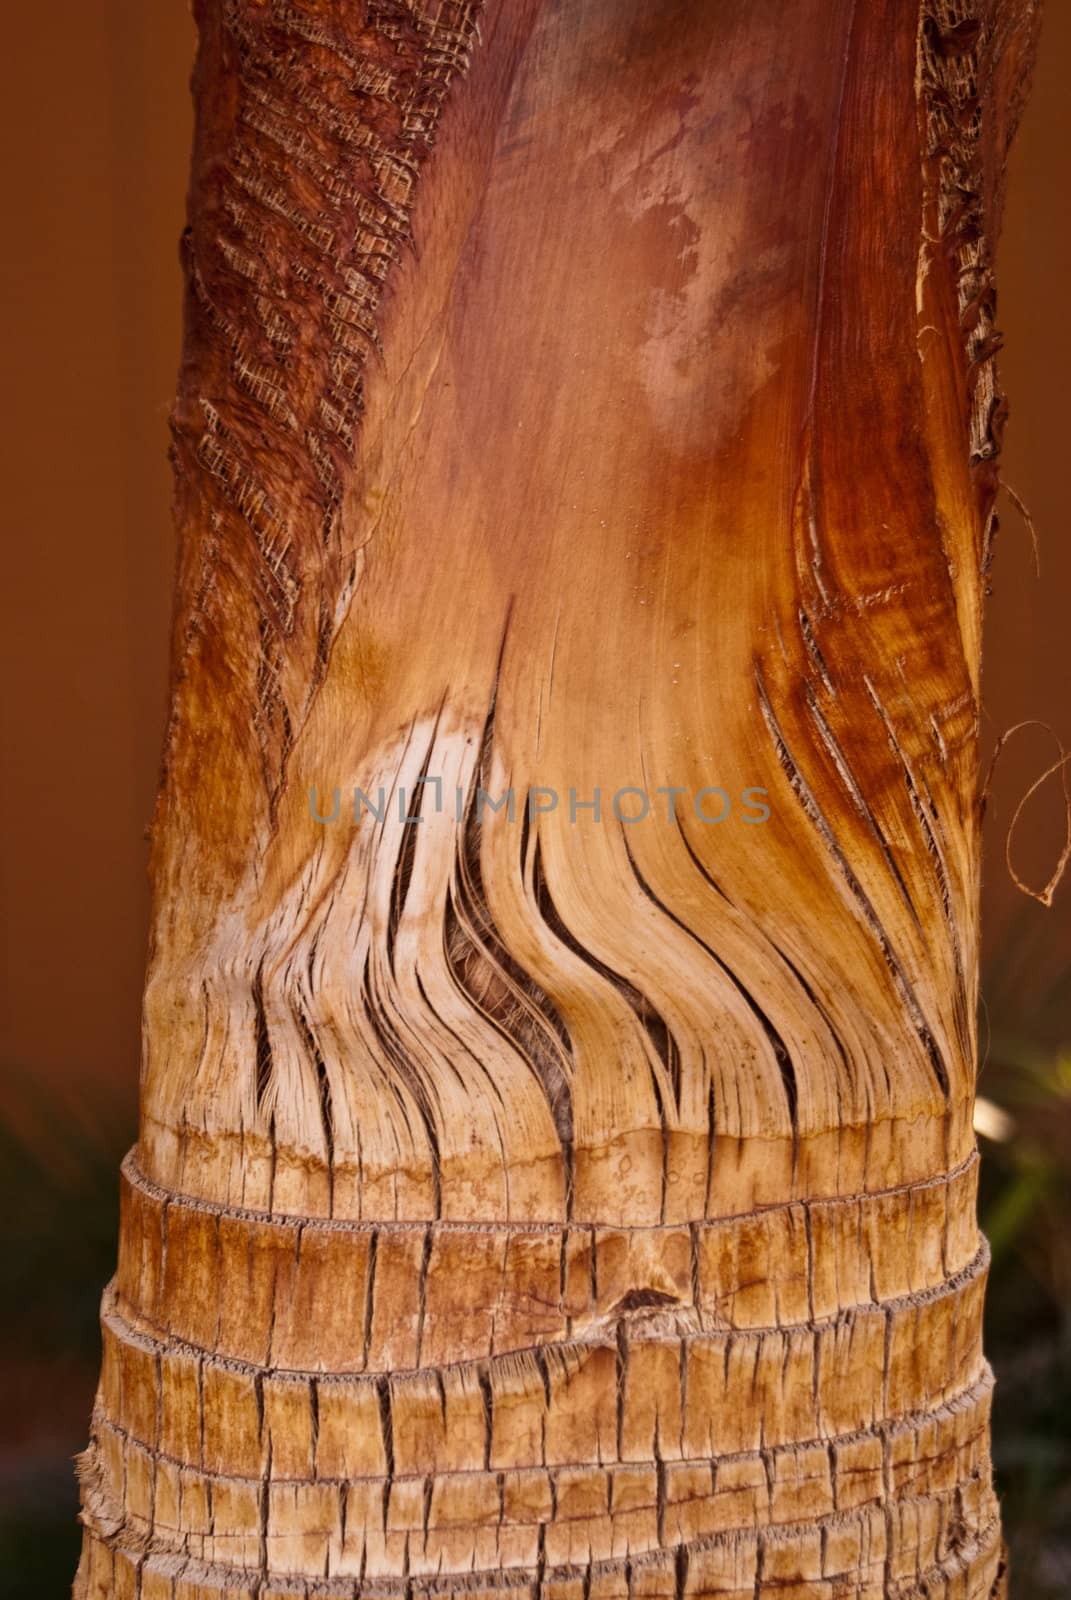 Rich and earthy colors of a bronzed palm tree trunk